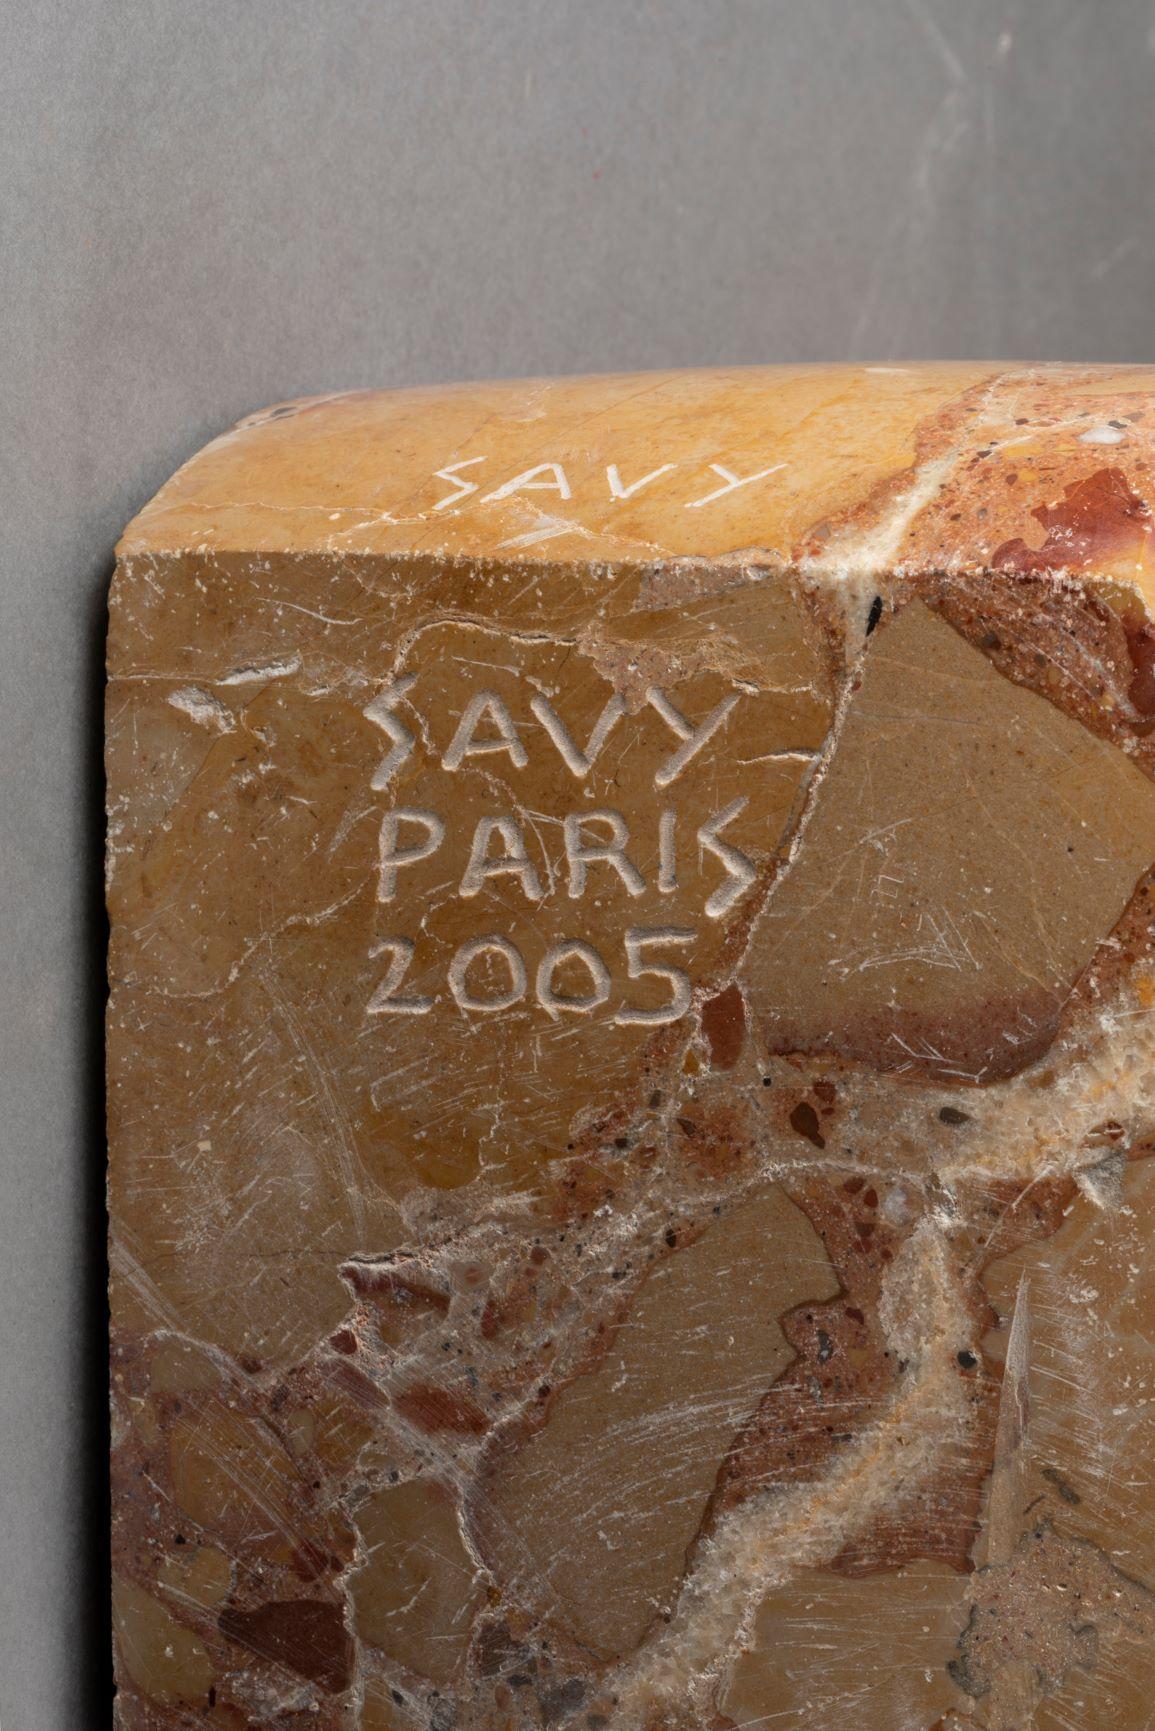 Fabulous Marble Sculpture by Contemporary Artist, Savy 